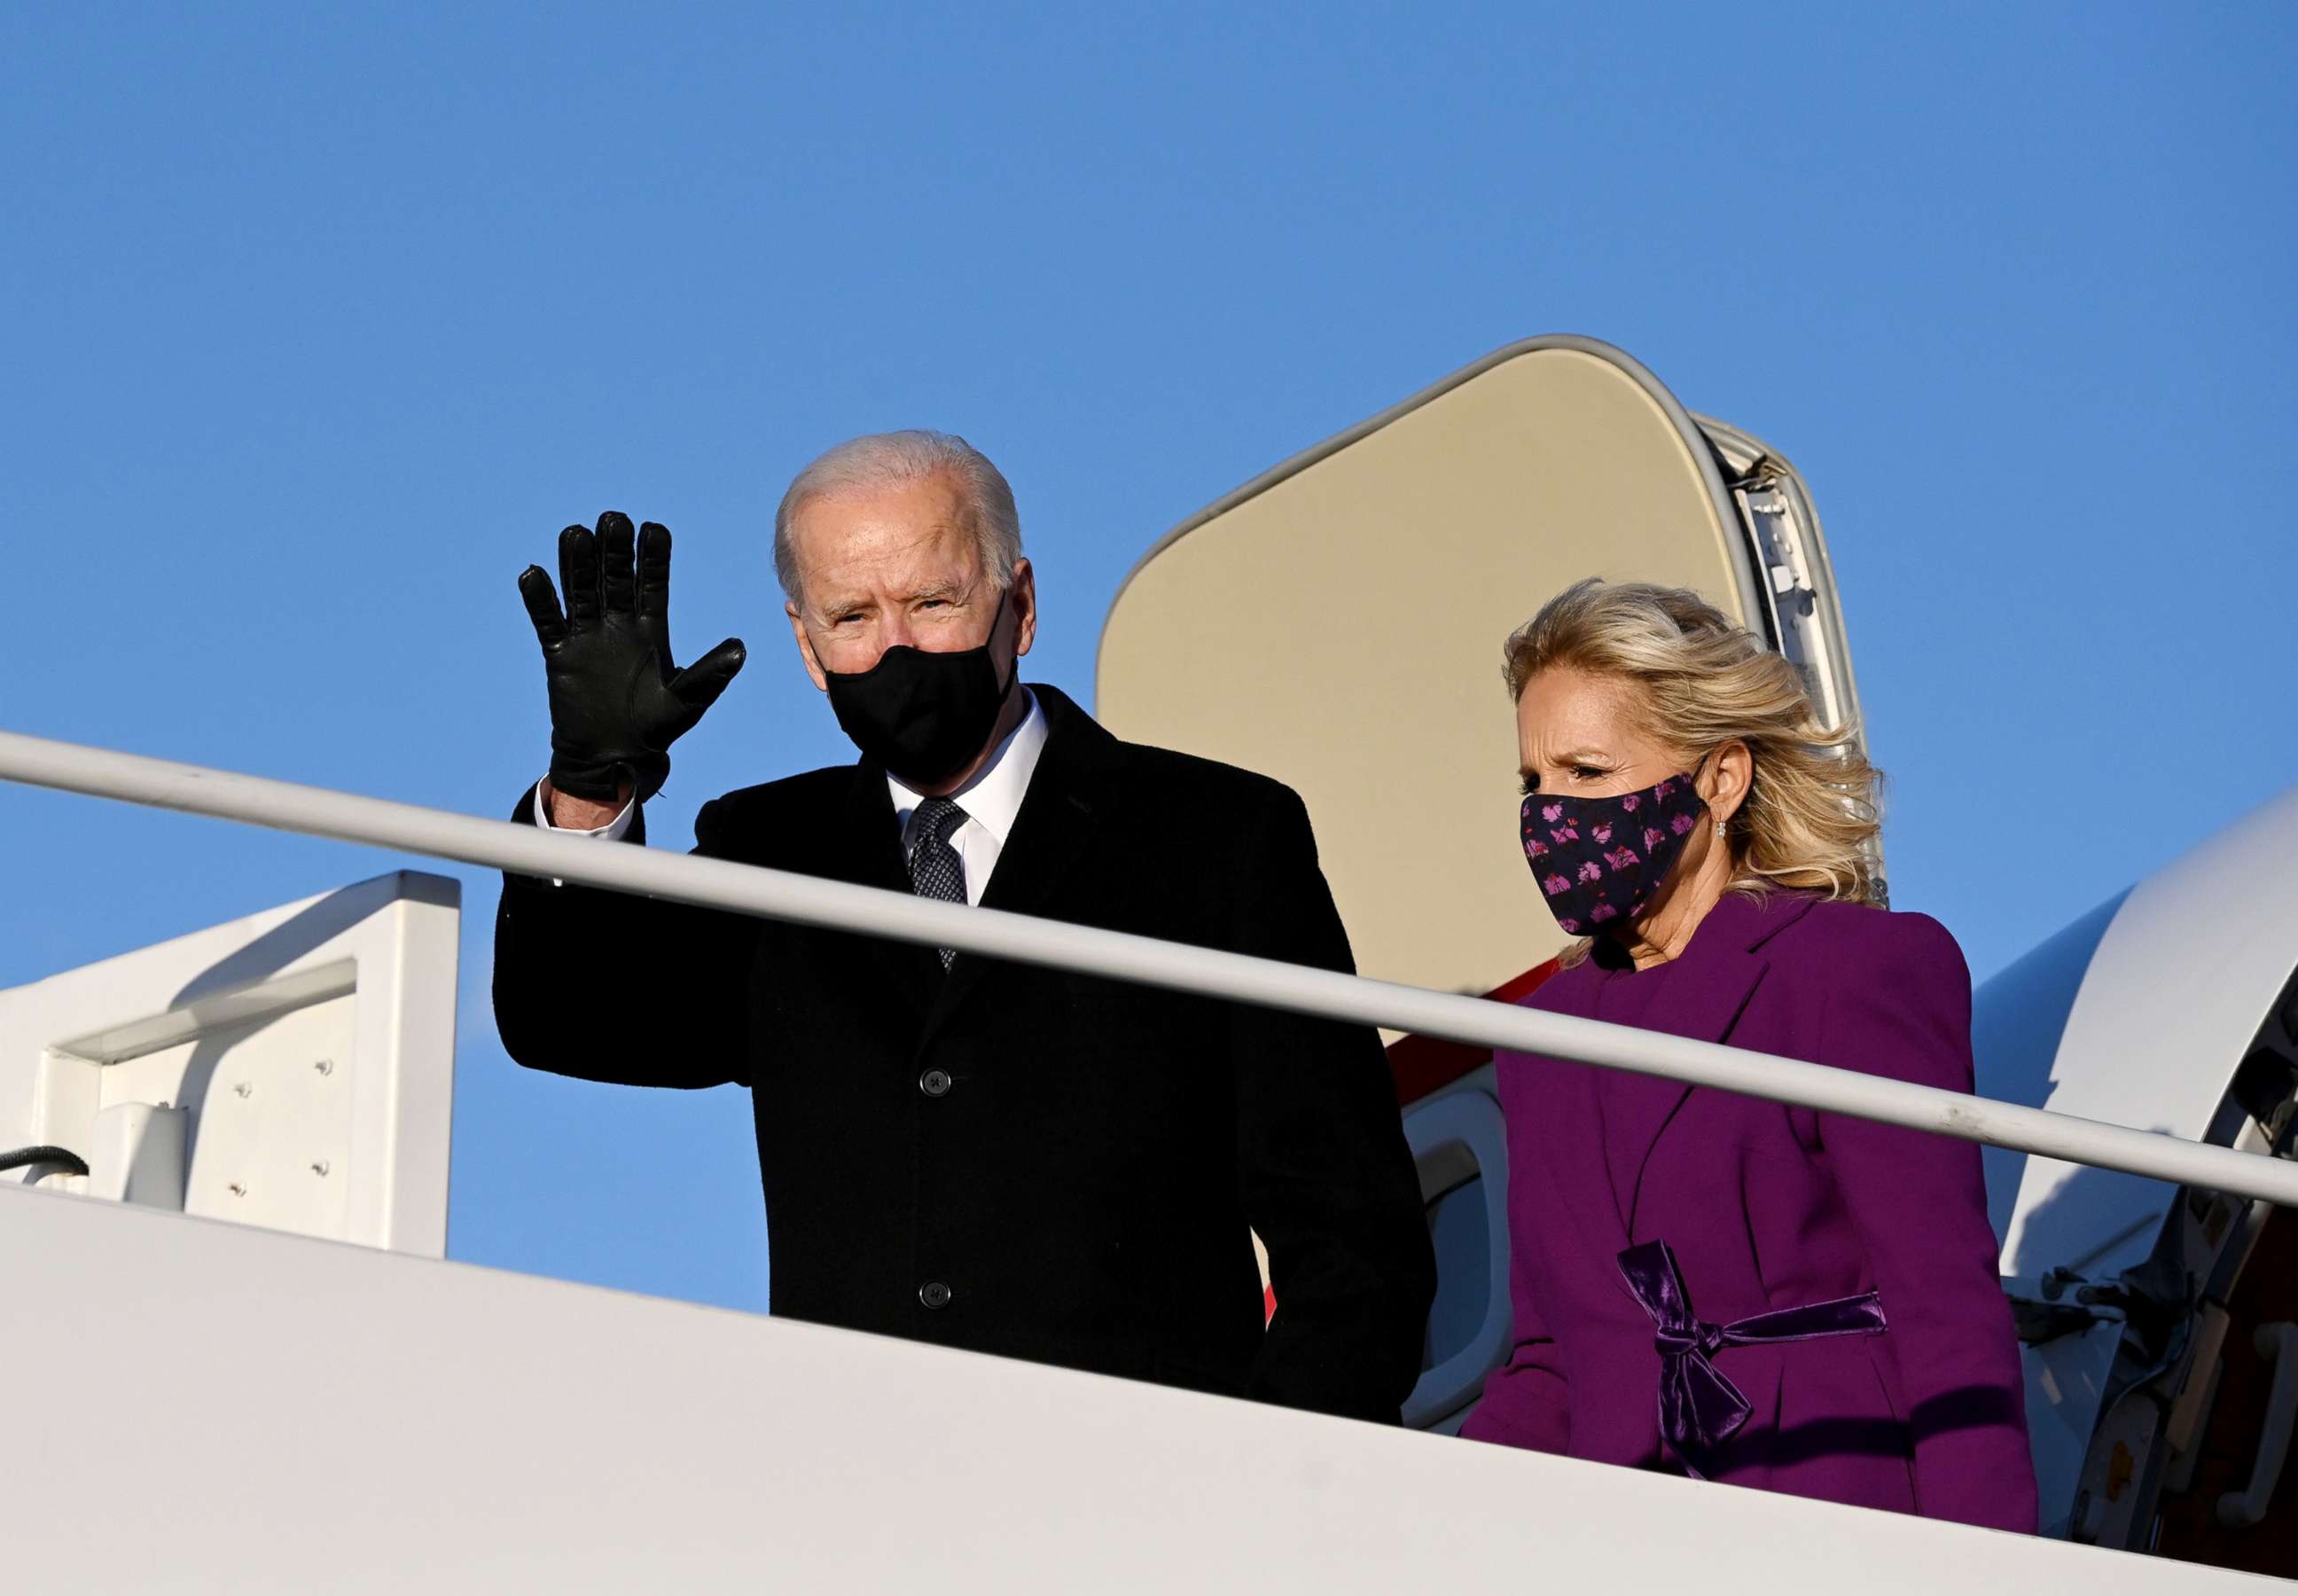 PHOTO: President-elect Joe Biden and incoming First Lady Jill Biden arrive at Joint Base Andrews in Maryland on Jan. 19, 2021.